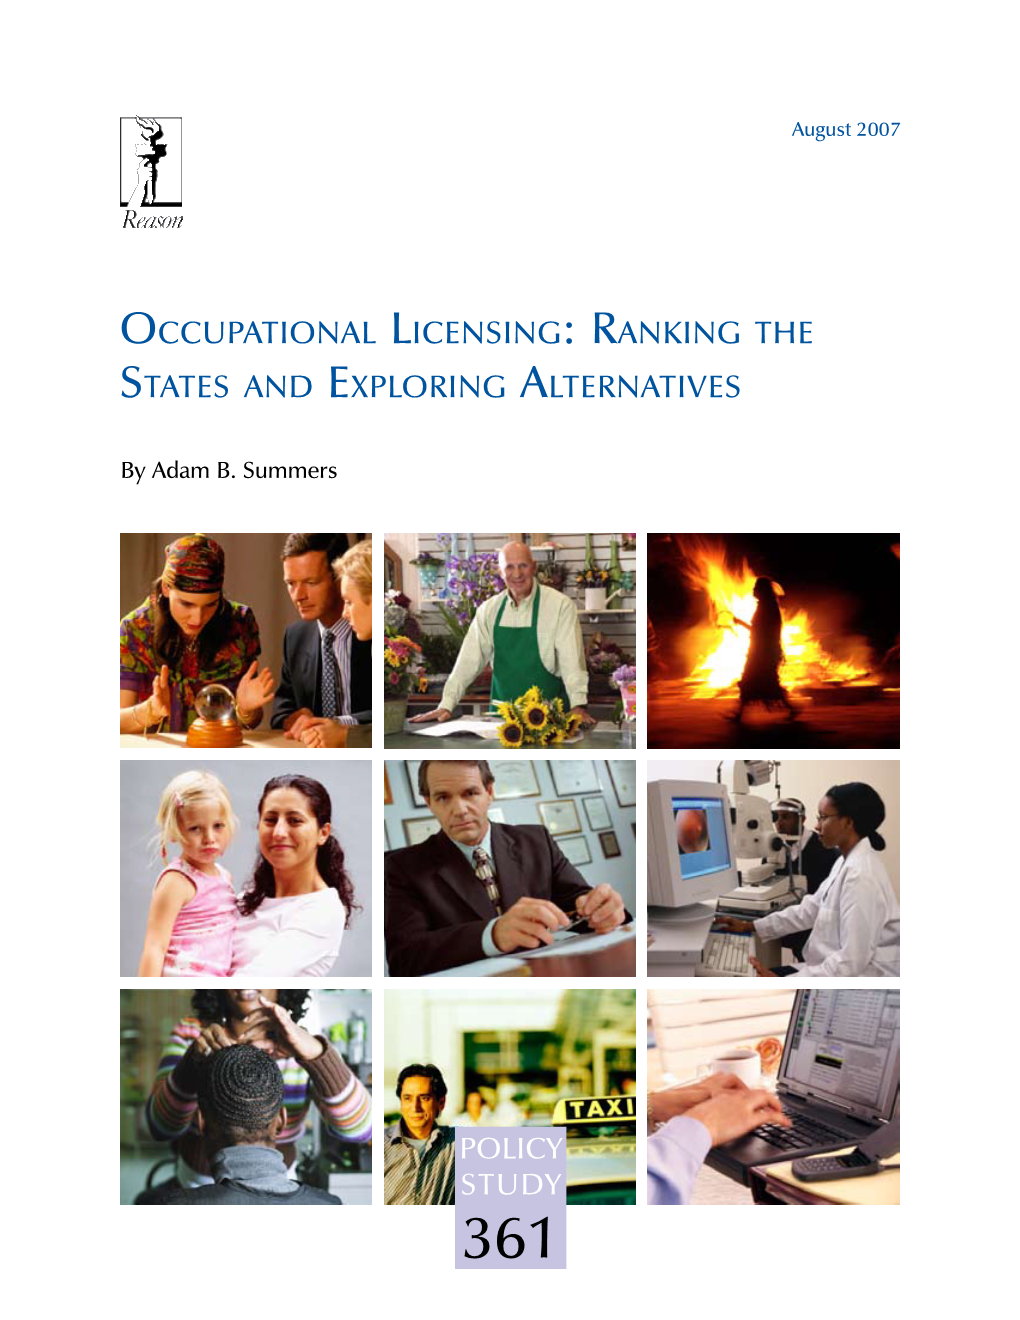 Occupational Licensing: Ranking the States and Exploring Alternatives